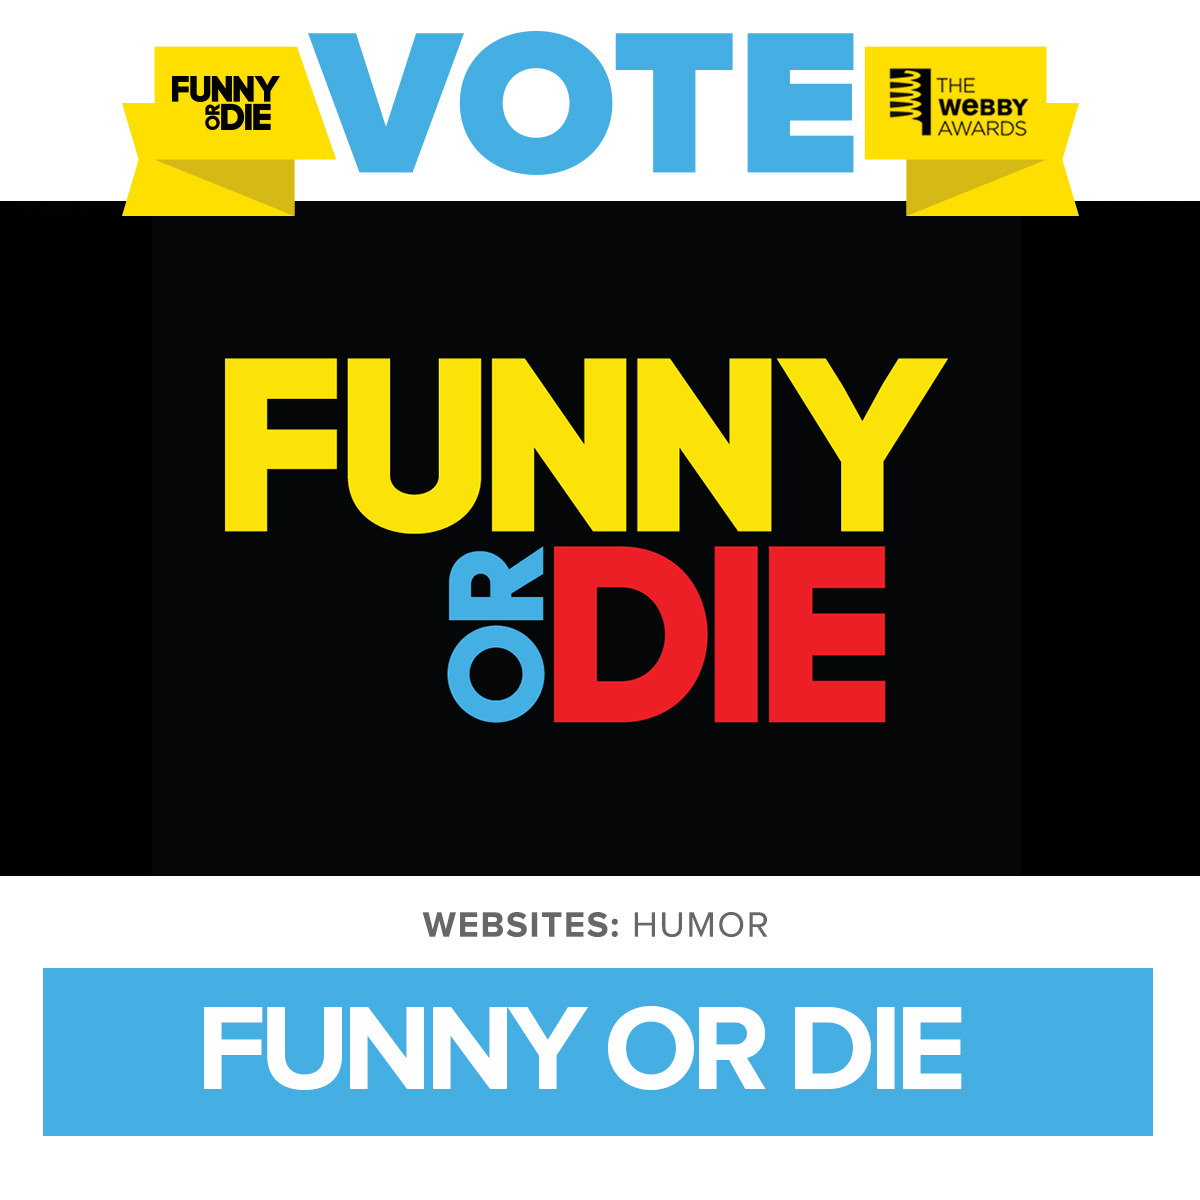 The Webby Awards​ are back, and we’ve been nominated!Click here to vote for us as best Humor website. We’d do the same for you.